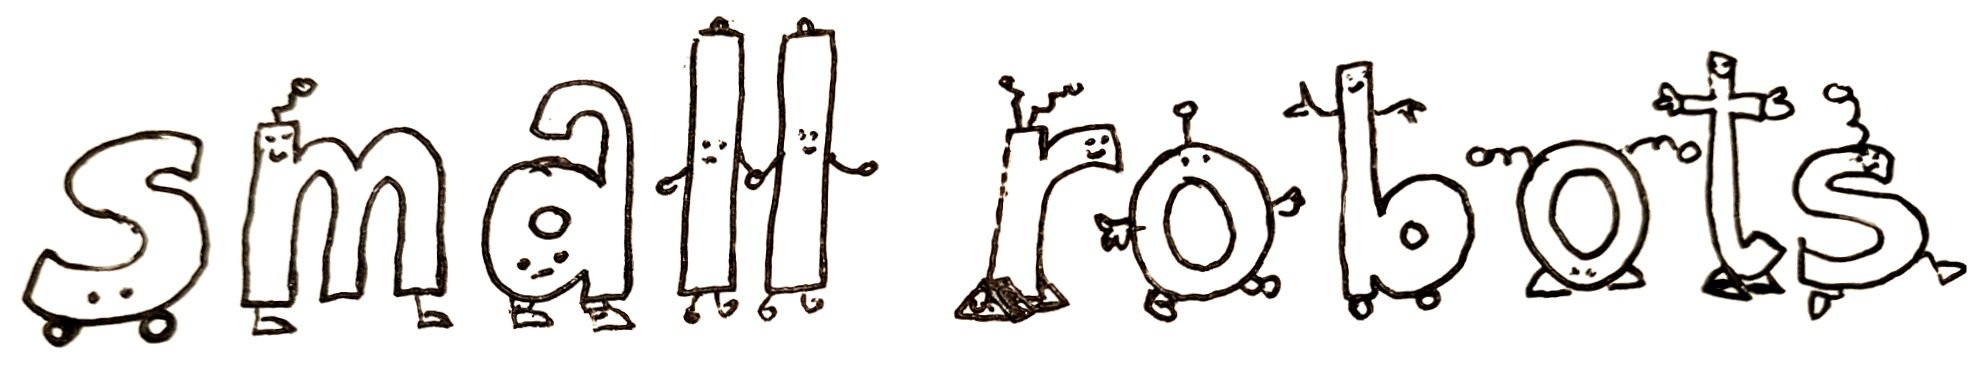 A collection of eleven robots, each in the shape of one of the letters of the words "small robobts".